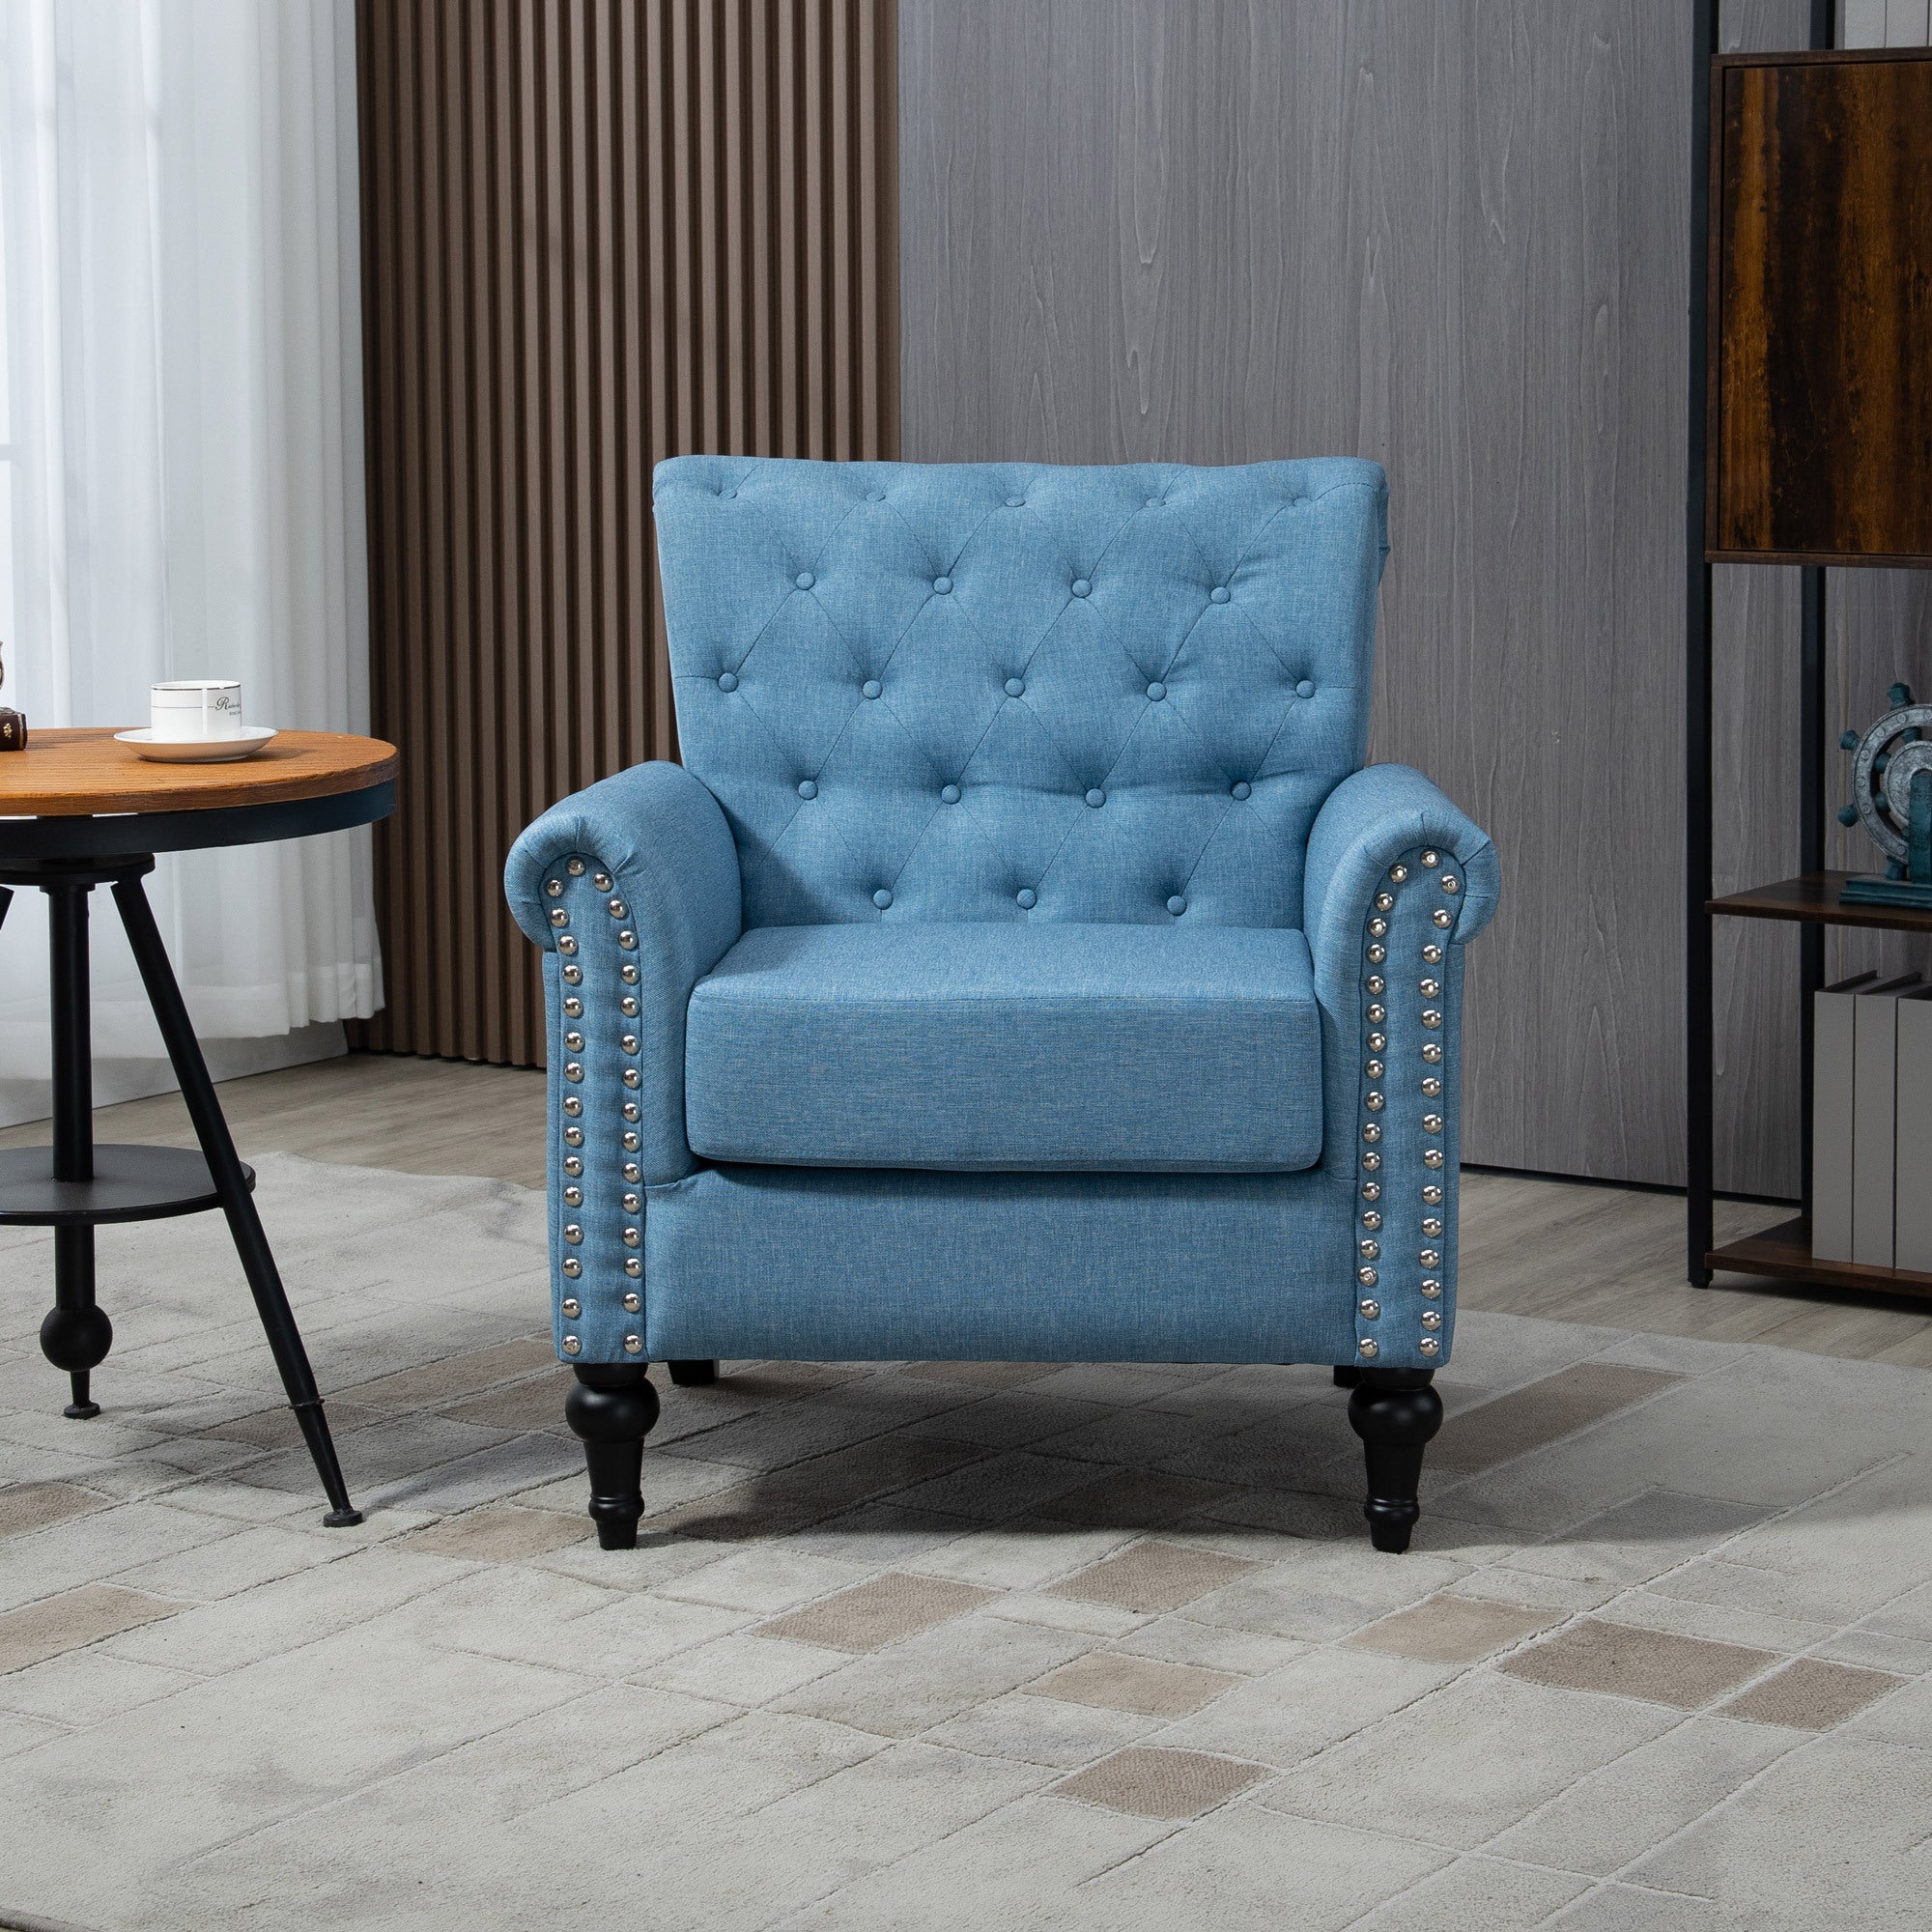 Mid-Century Modern Accent Chair, Linen Armchair w/Tufted Back/Wood Legs, Upholstered Lounge Arm Chair Single Sofa for Living Room Bedroom,Light Blue